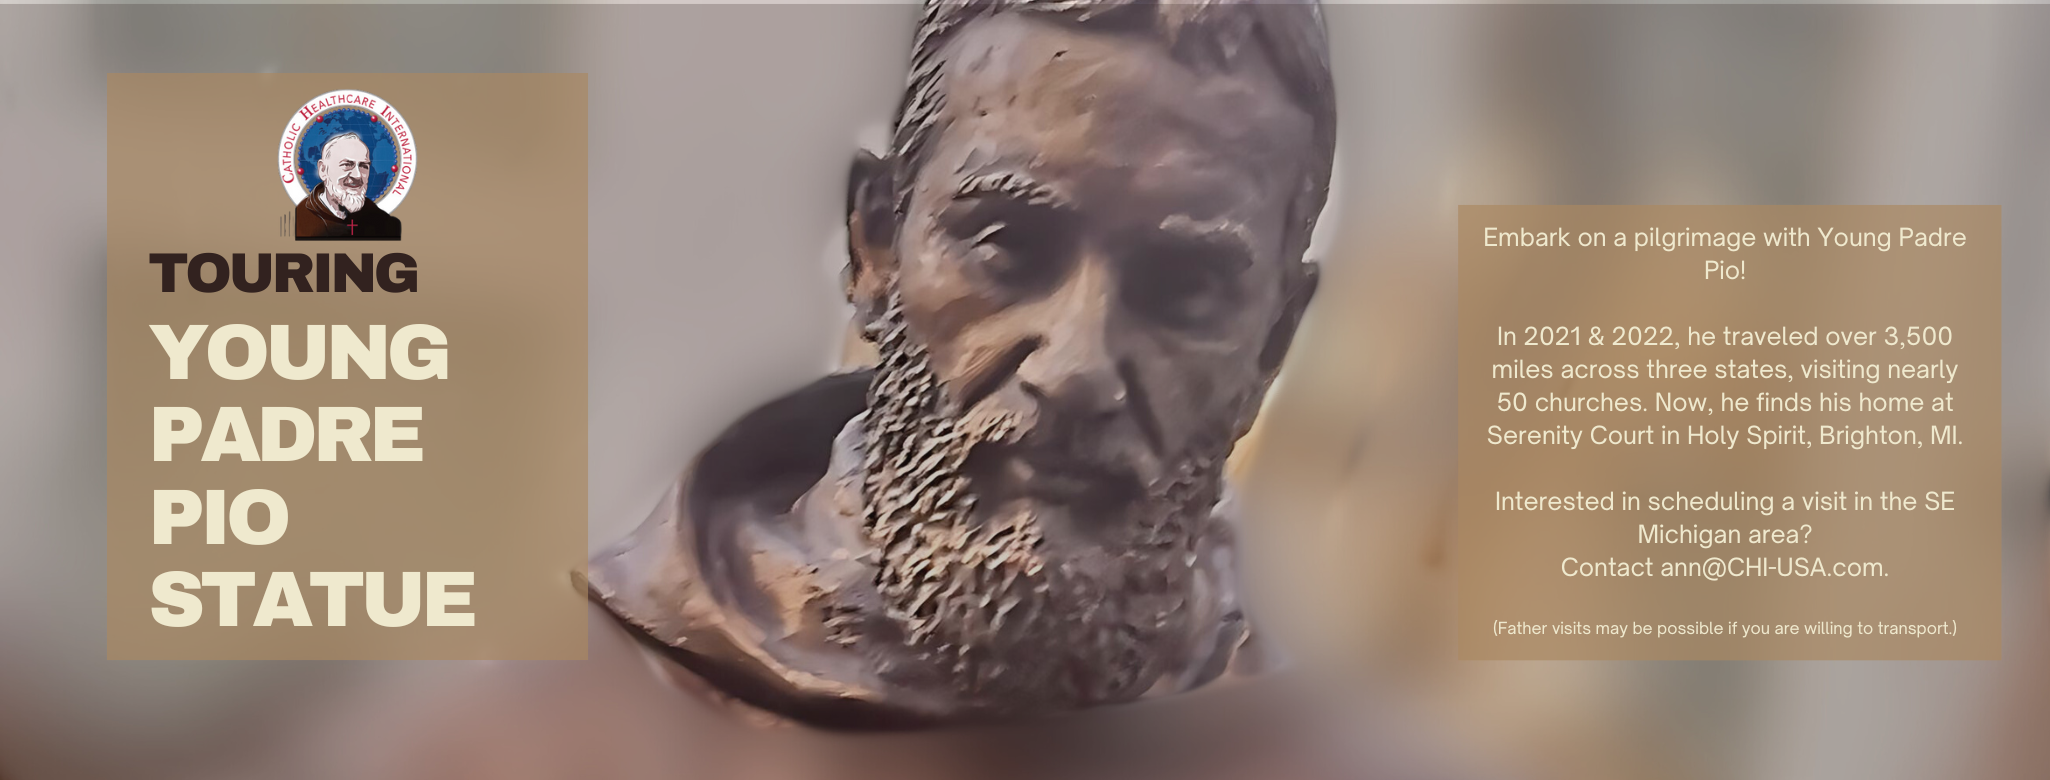 Young Padre Pio Statue